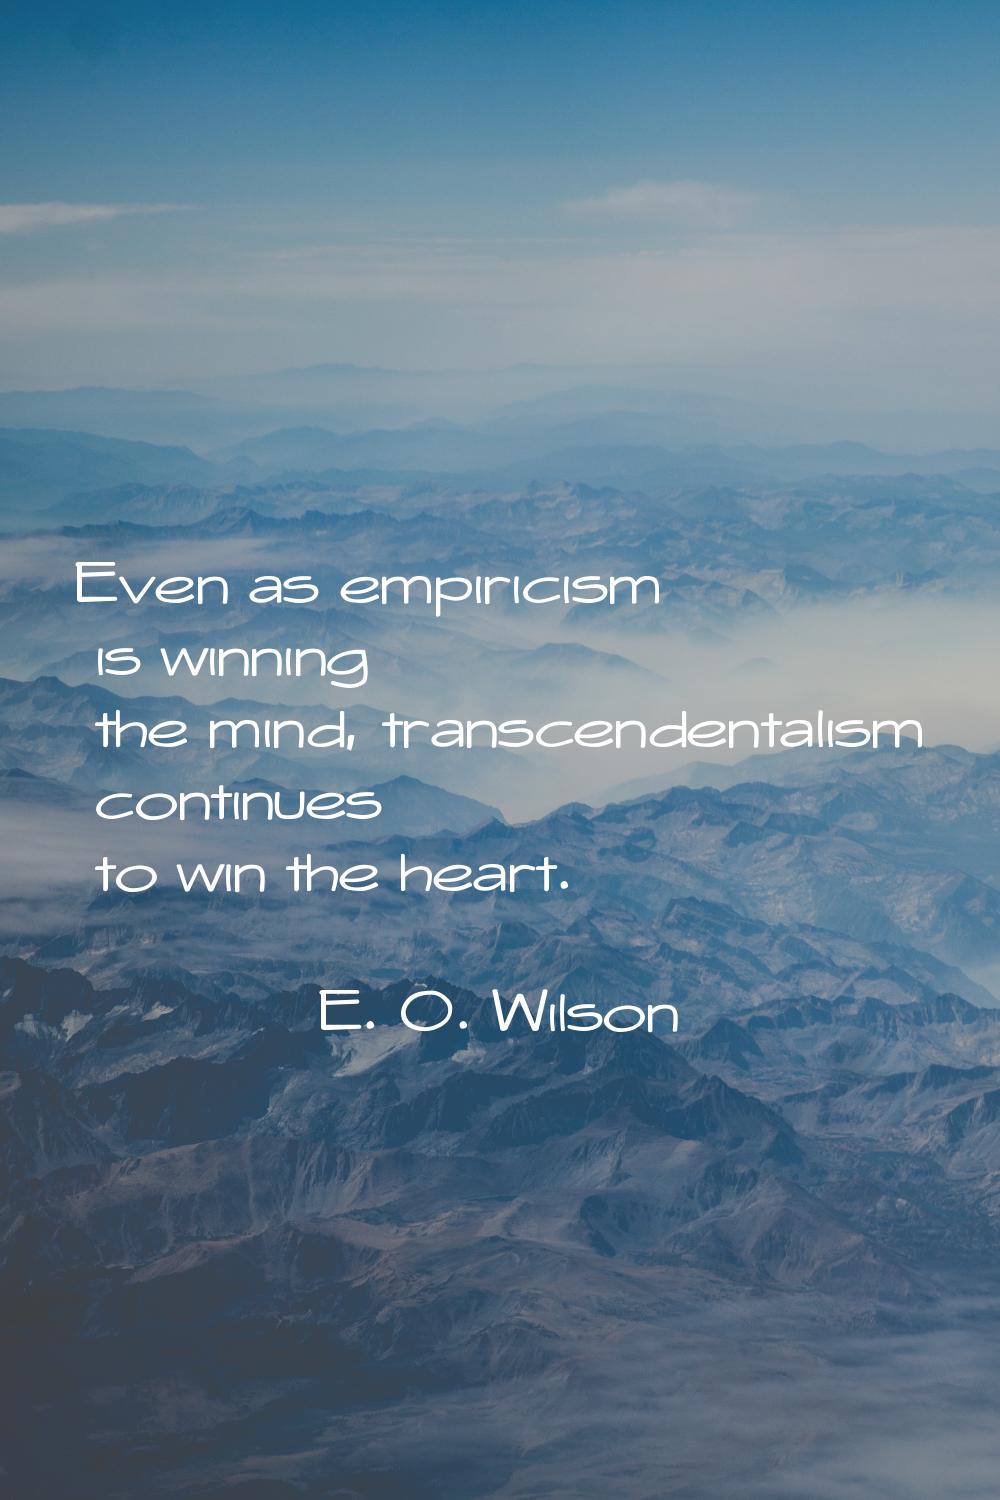 Even as empiricism is winning the mind, transcendentalism continues to win the heart.